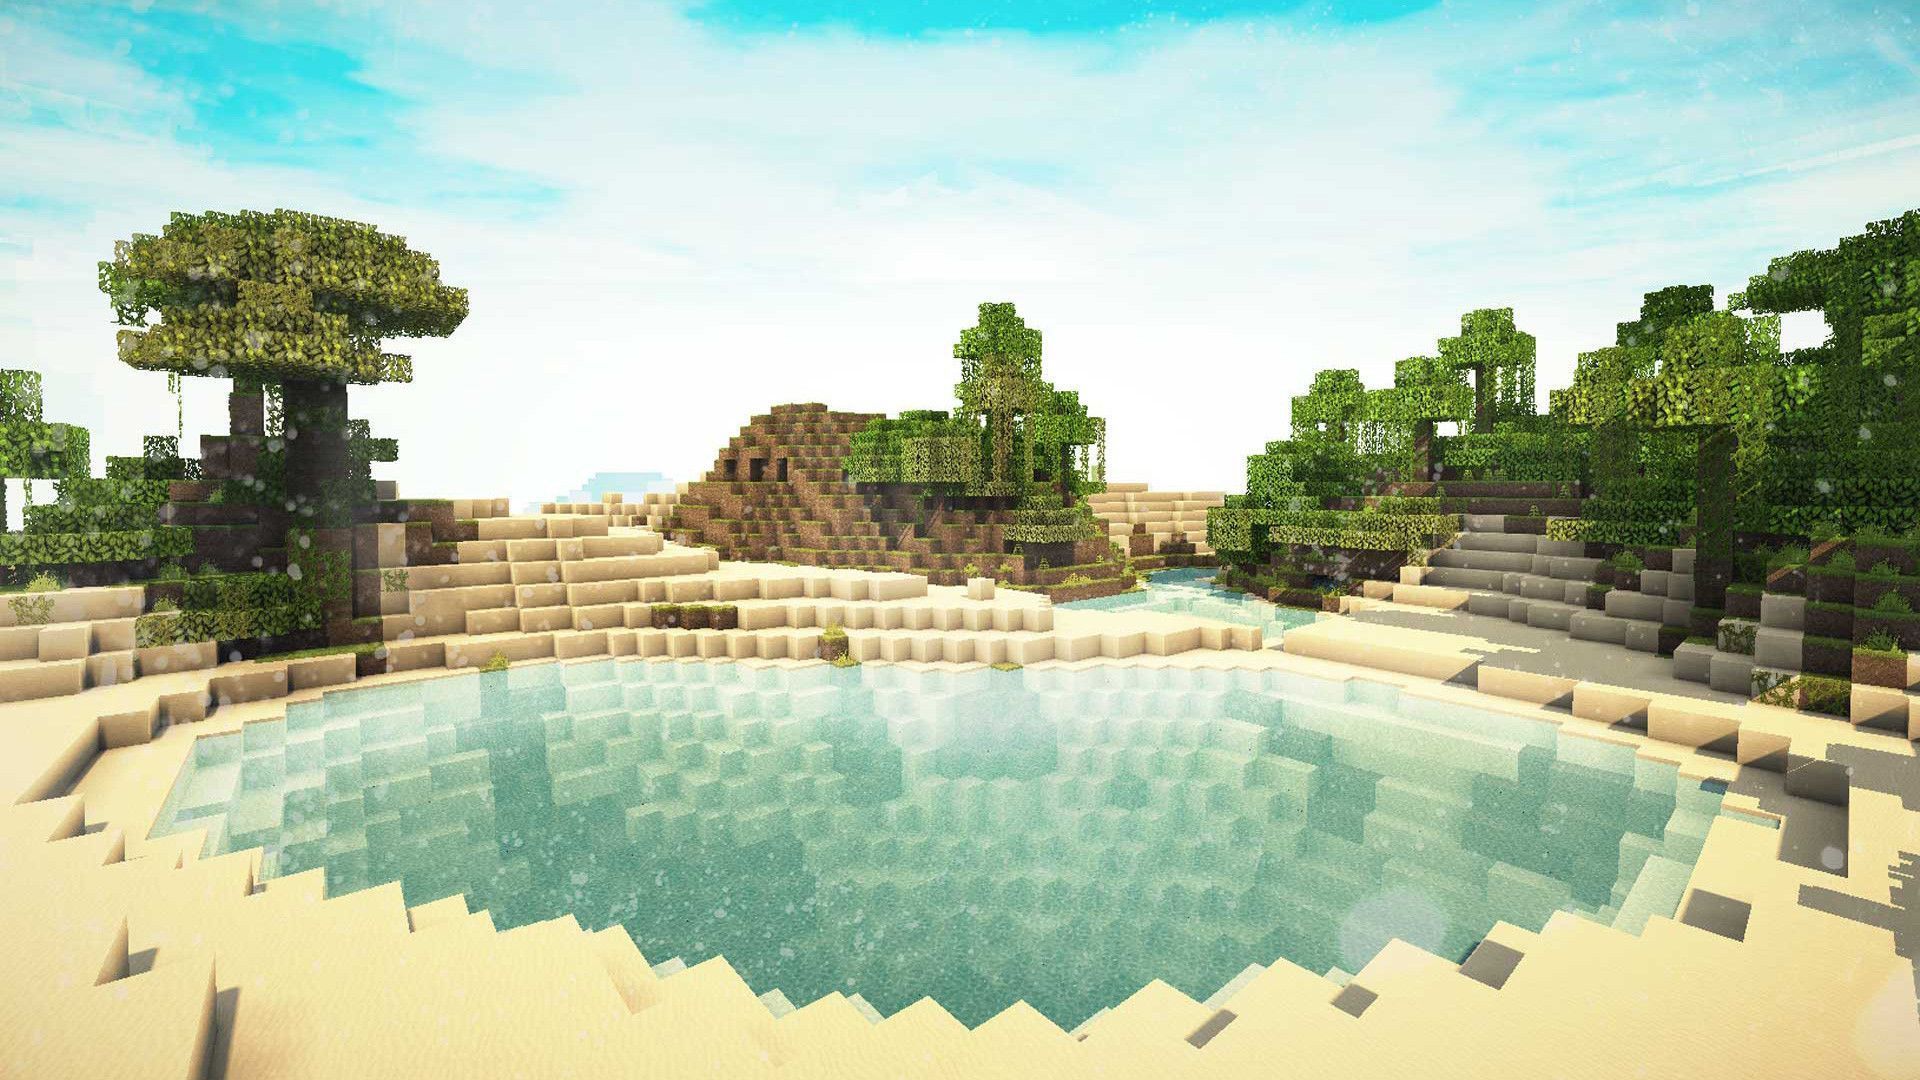 HD Wallpapers Of Minecraft